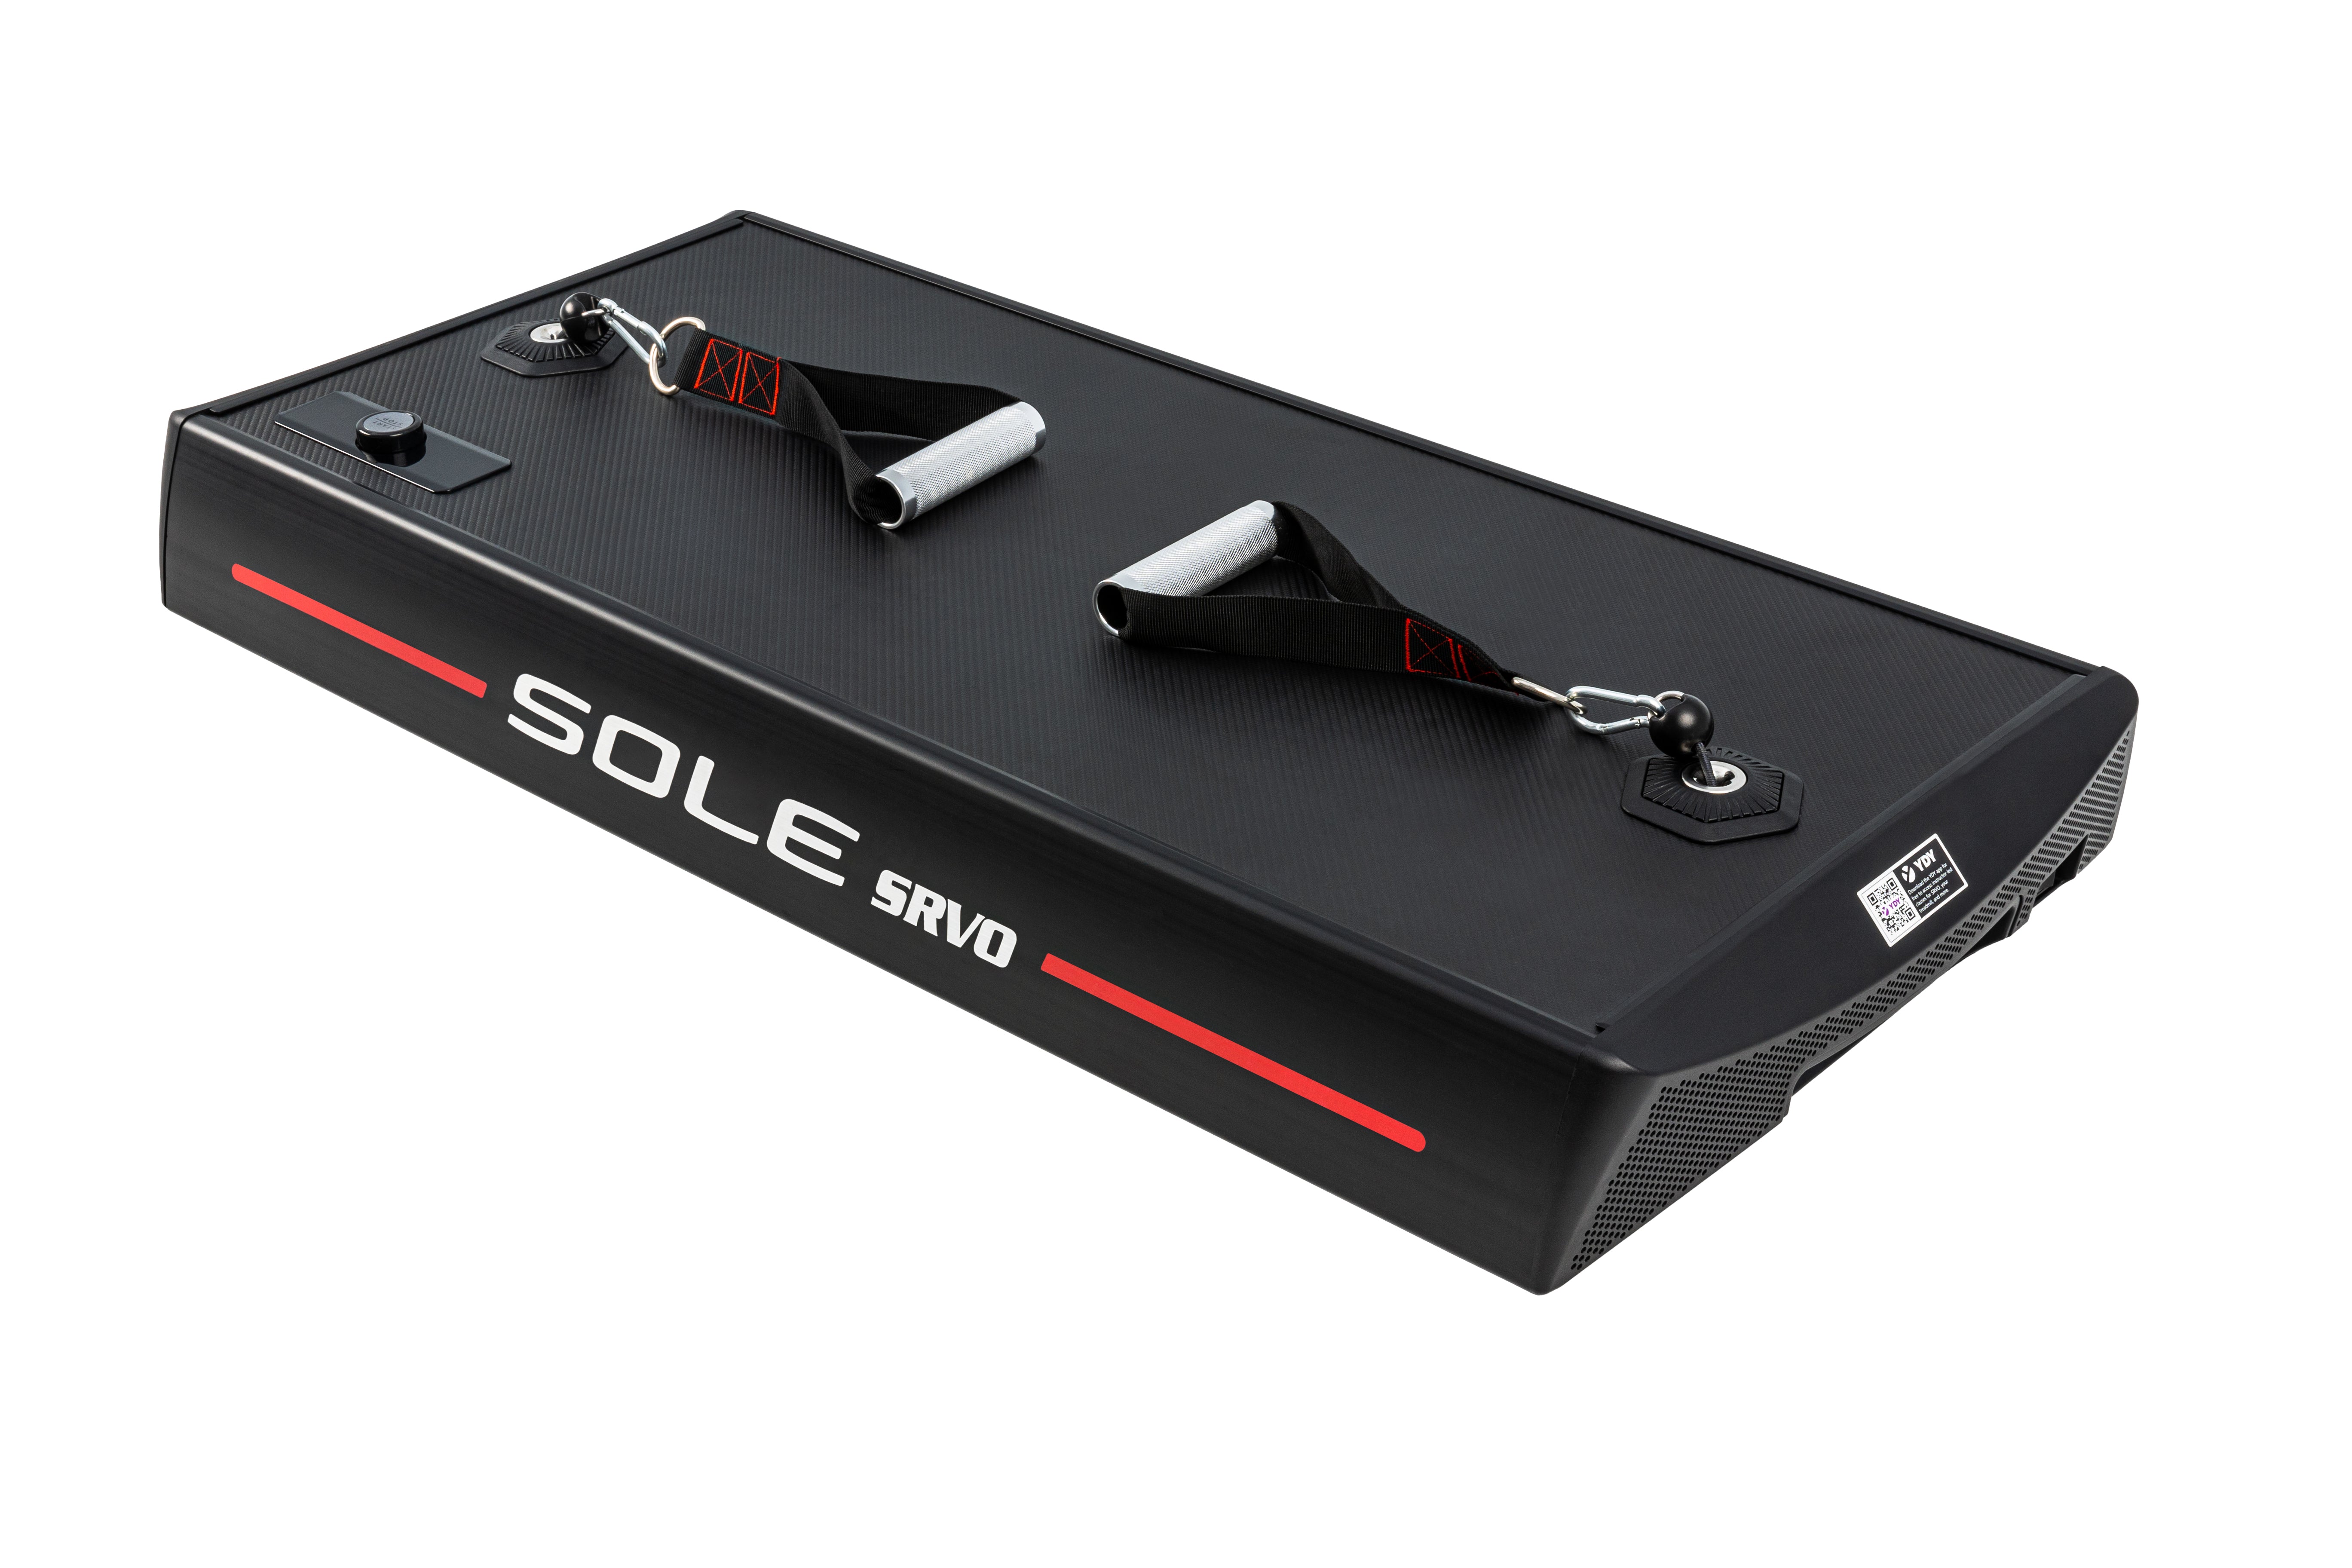 Top view of the Sole SRVO device showcasing its black textured surface, "SOLE SRVO" logo with a red stripe, two attached handles with red stitching, and a metal clasp connected to a key ring.